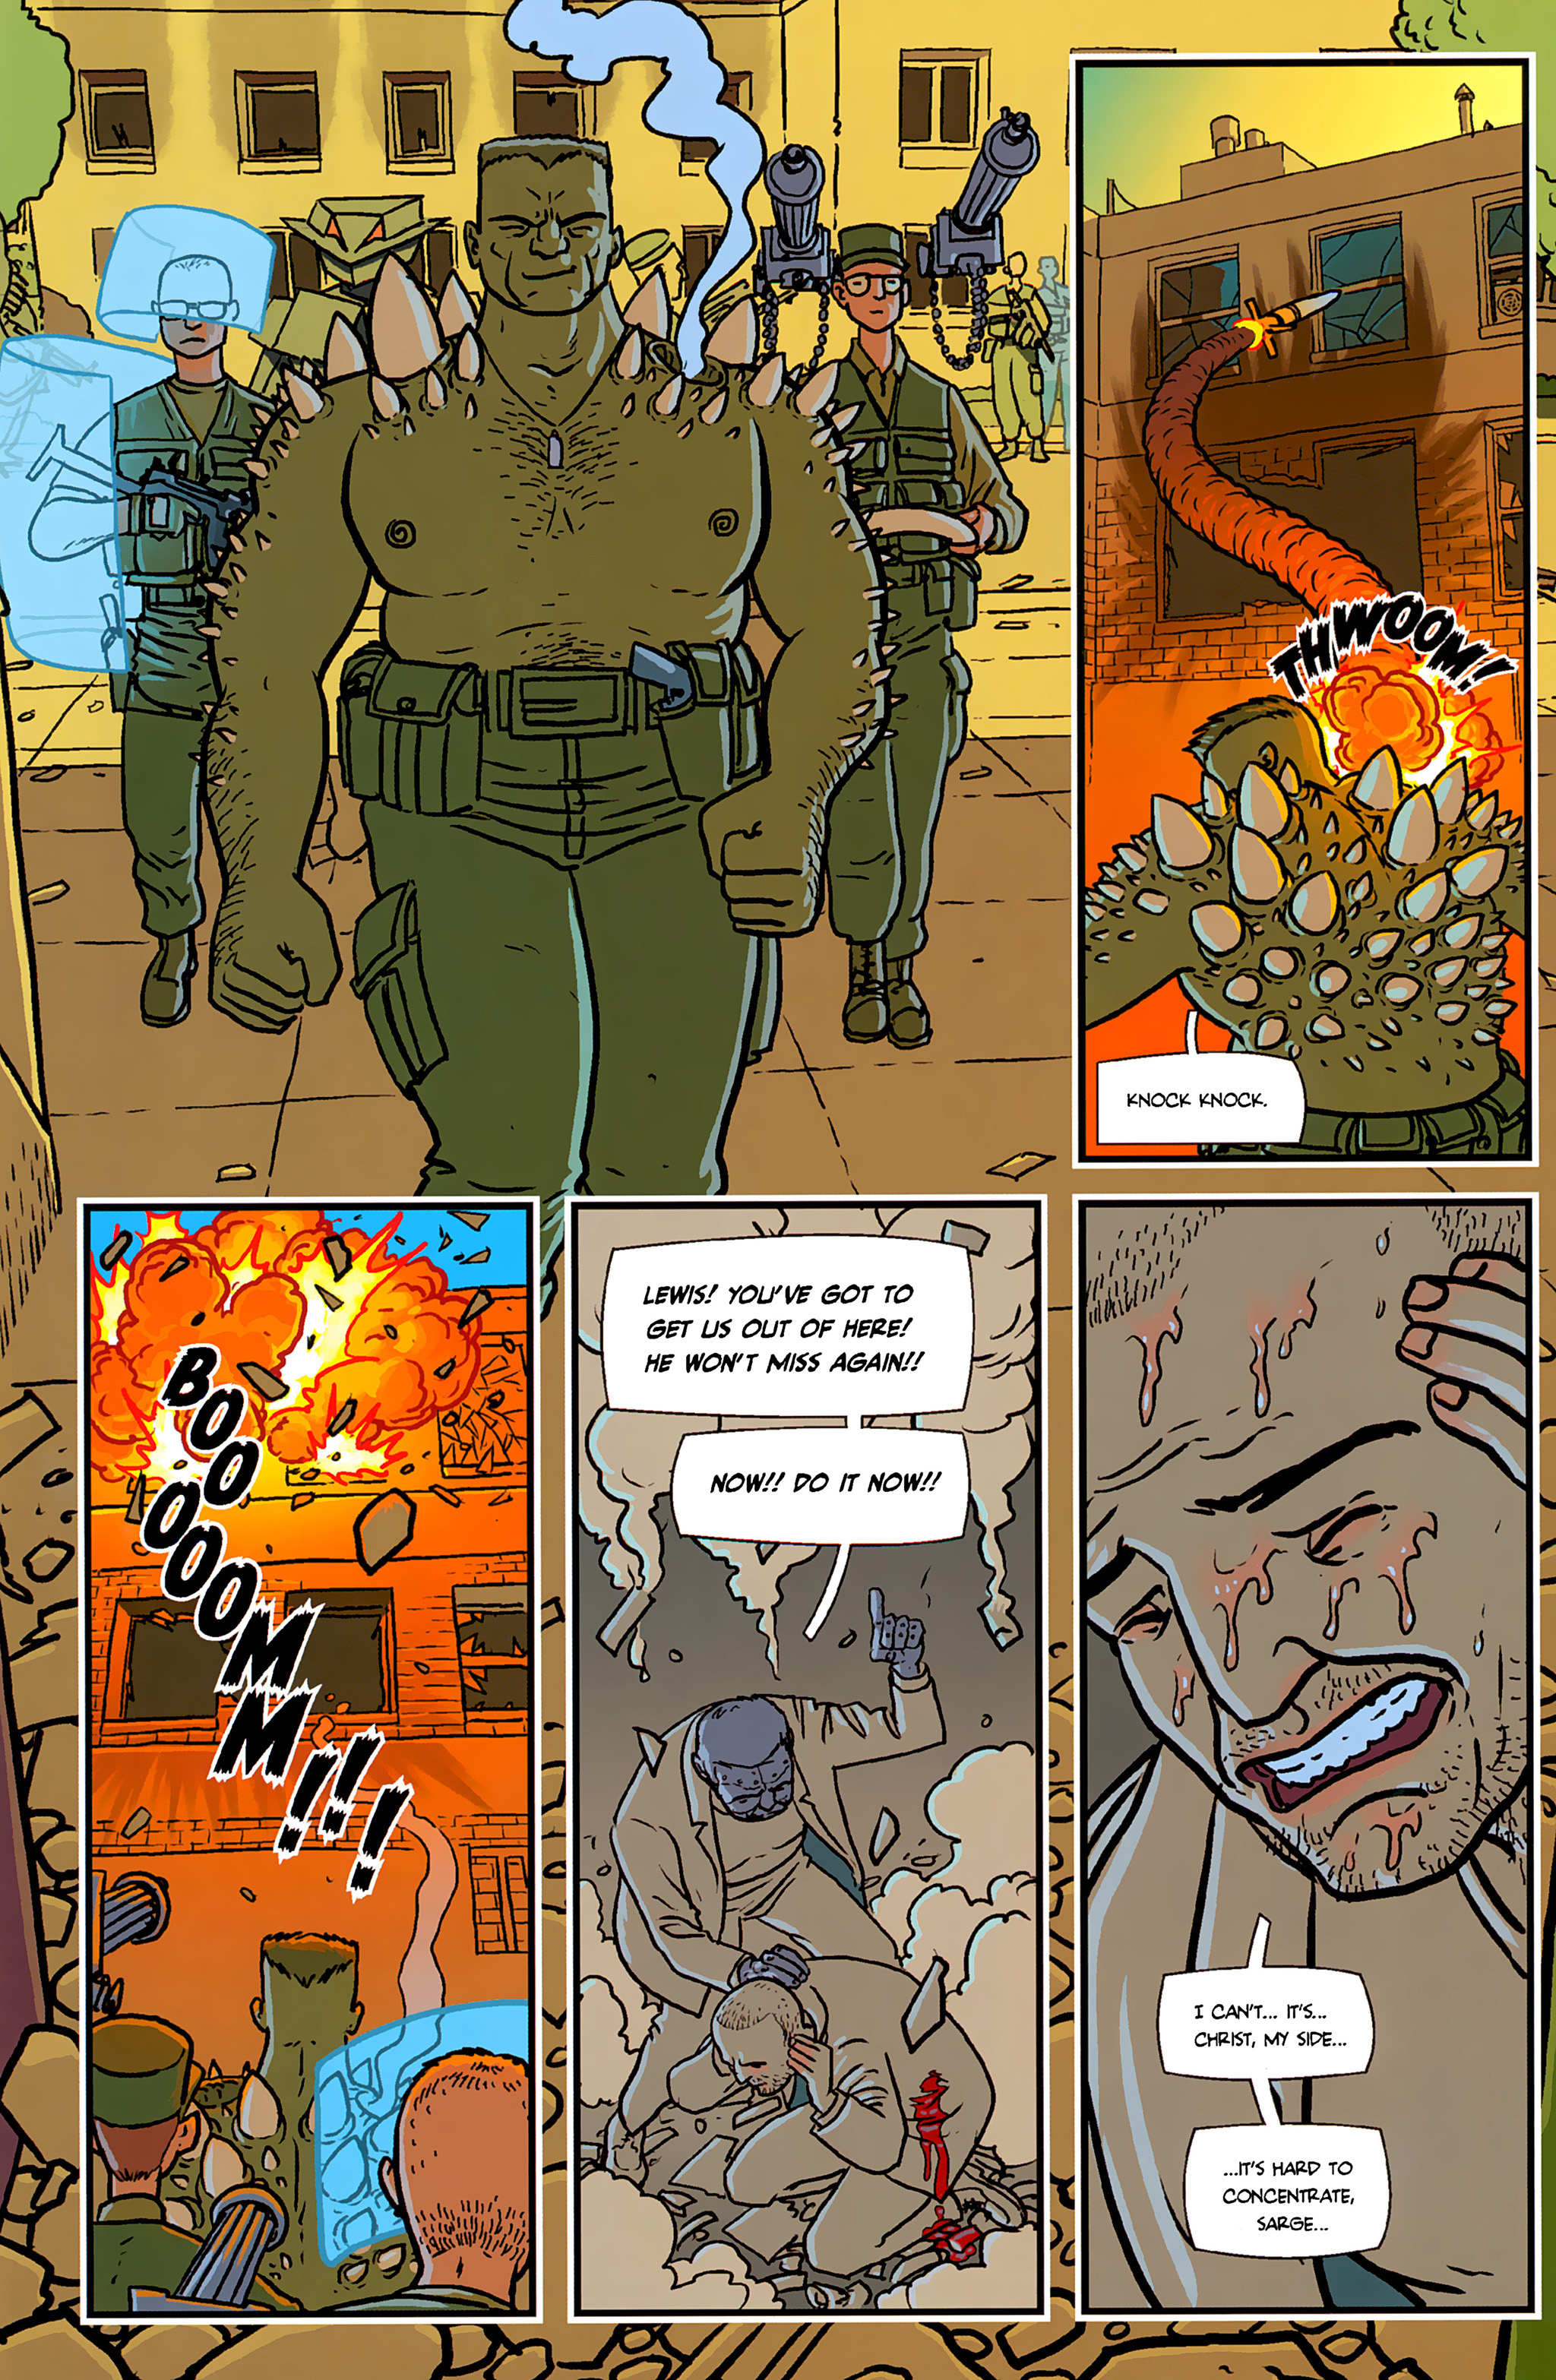 Read online Ordinary comic -  Issue #3 - 15